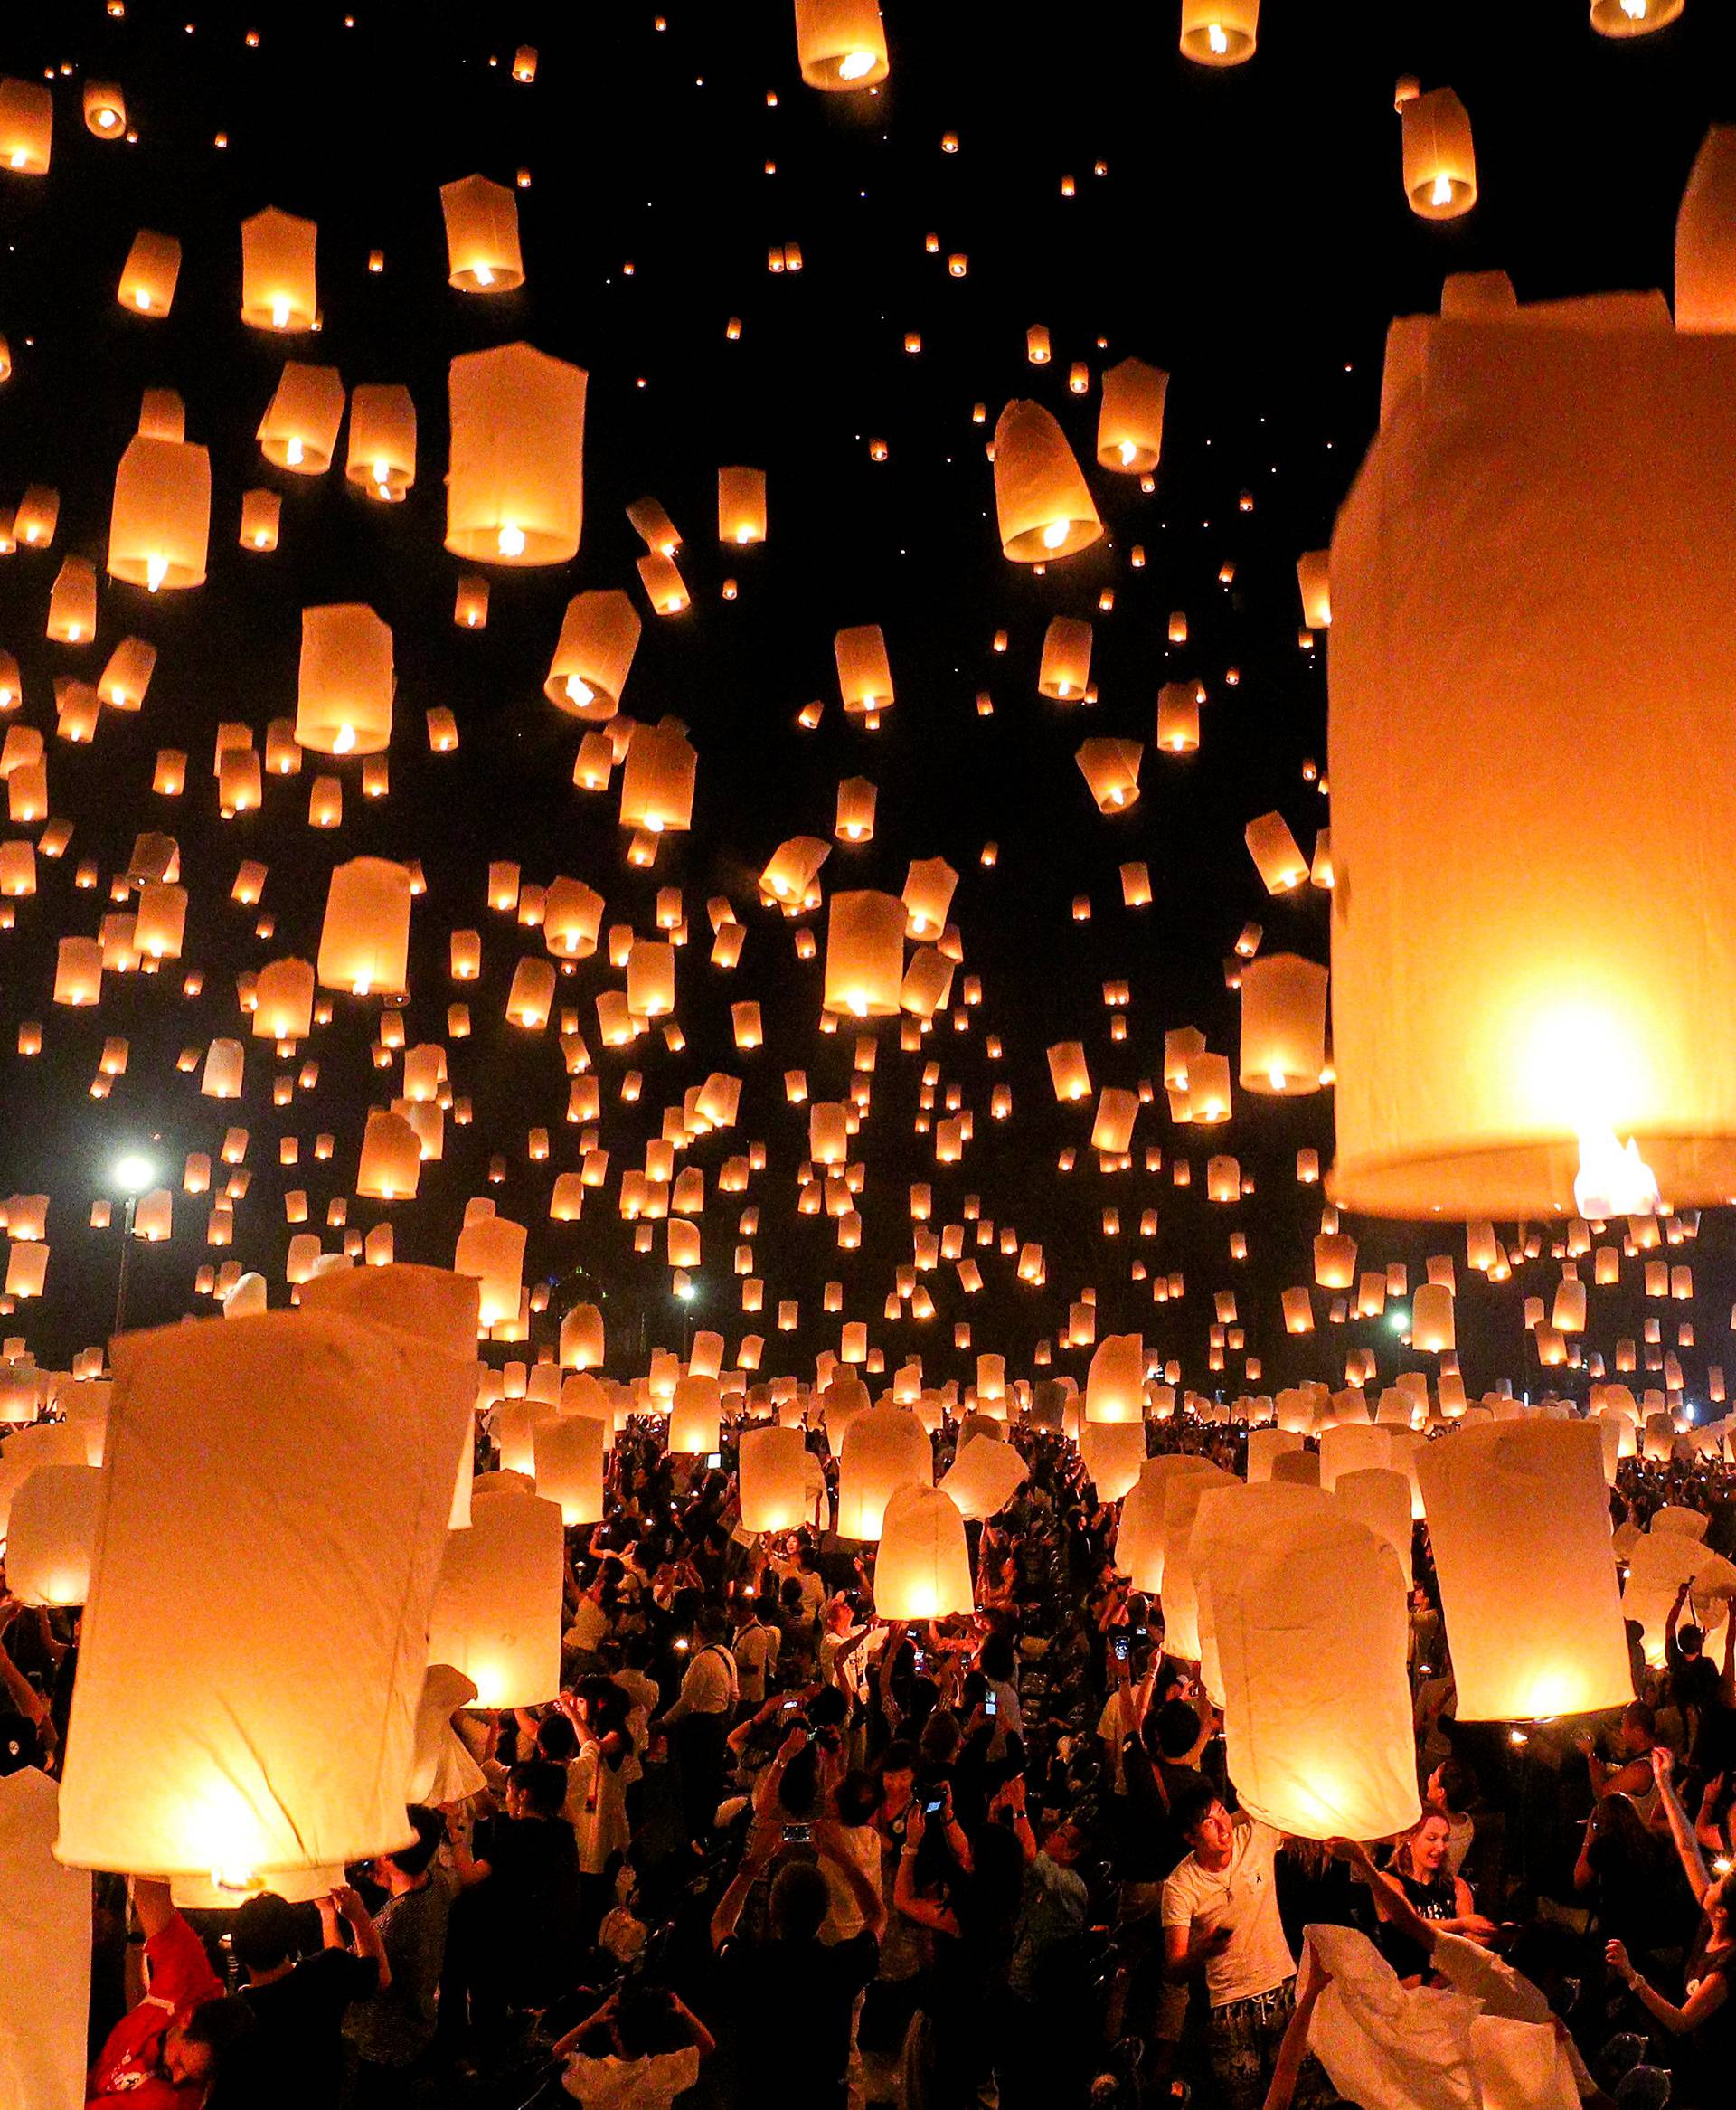 People release floating lanterns during the festival of Yee Peng in the northern capital of Chiang Mai